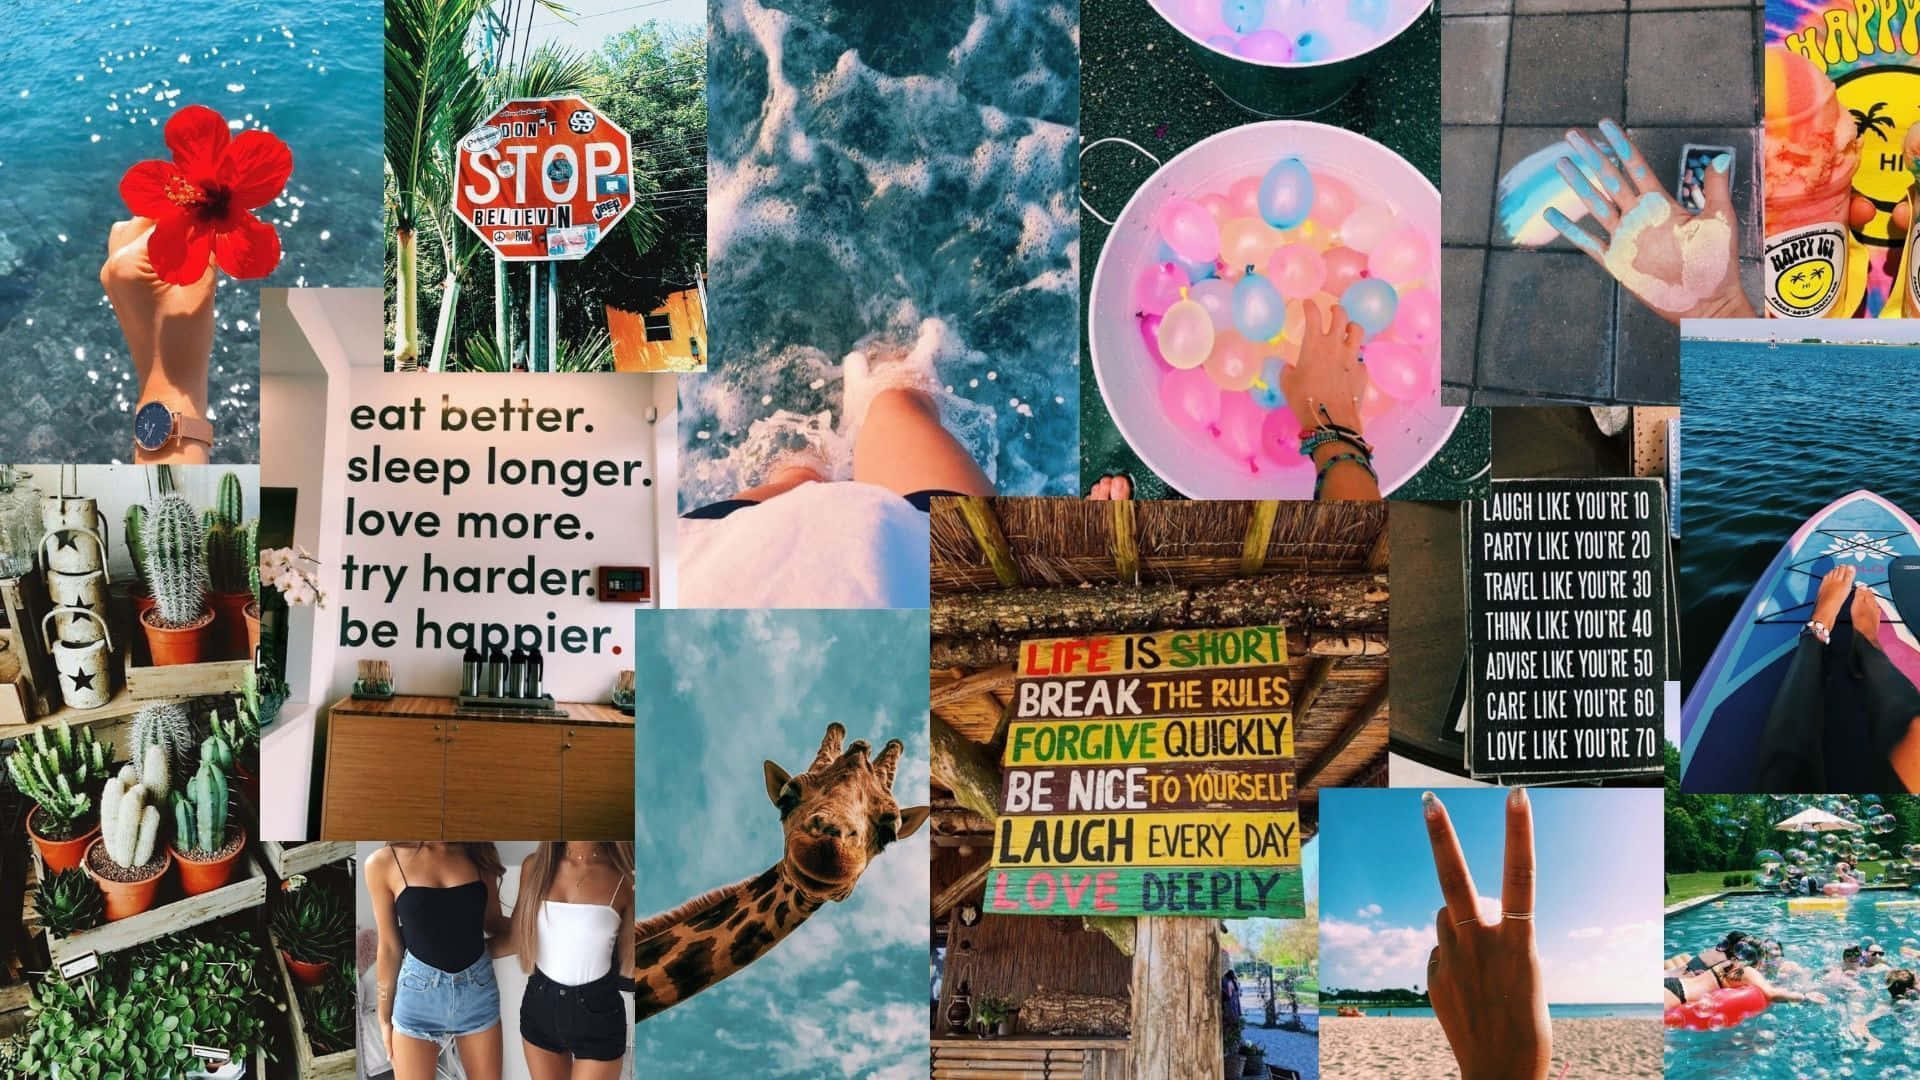 Get creative with Vsco to uncover your hidden potential